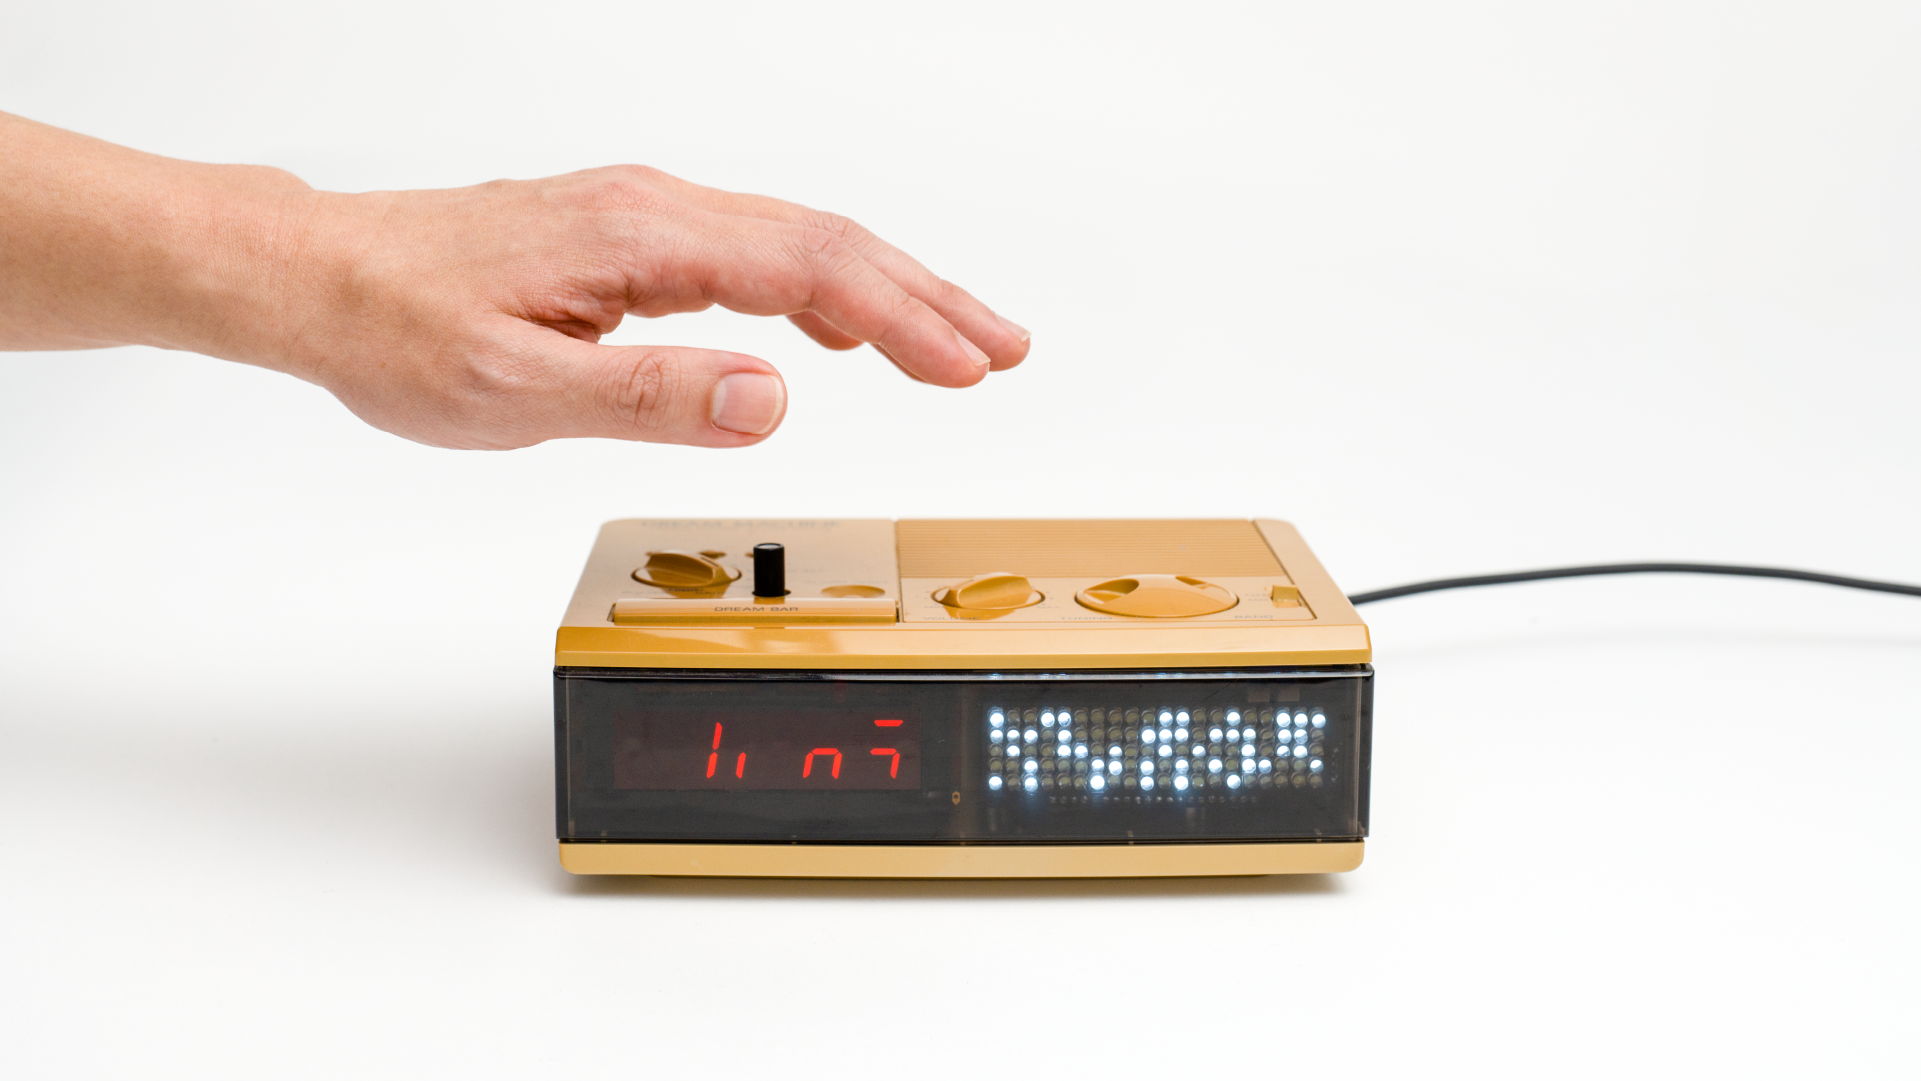 Clock Radio repaired by Clement Zheng (SG) part of R for Repair 2021 edition. Image by KHOOGJ